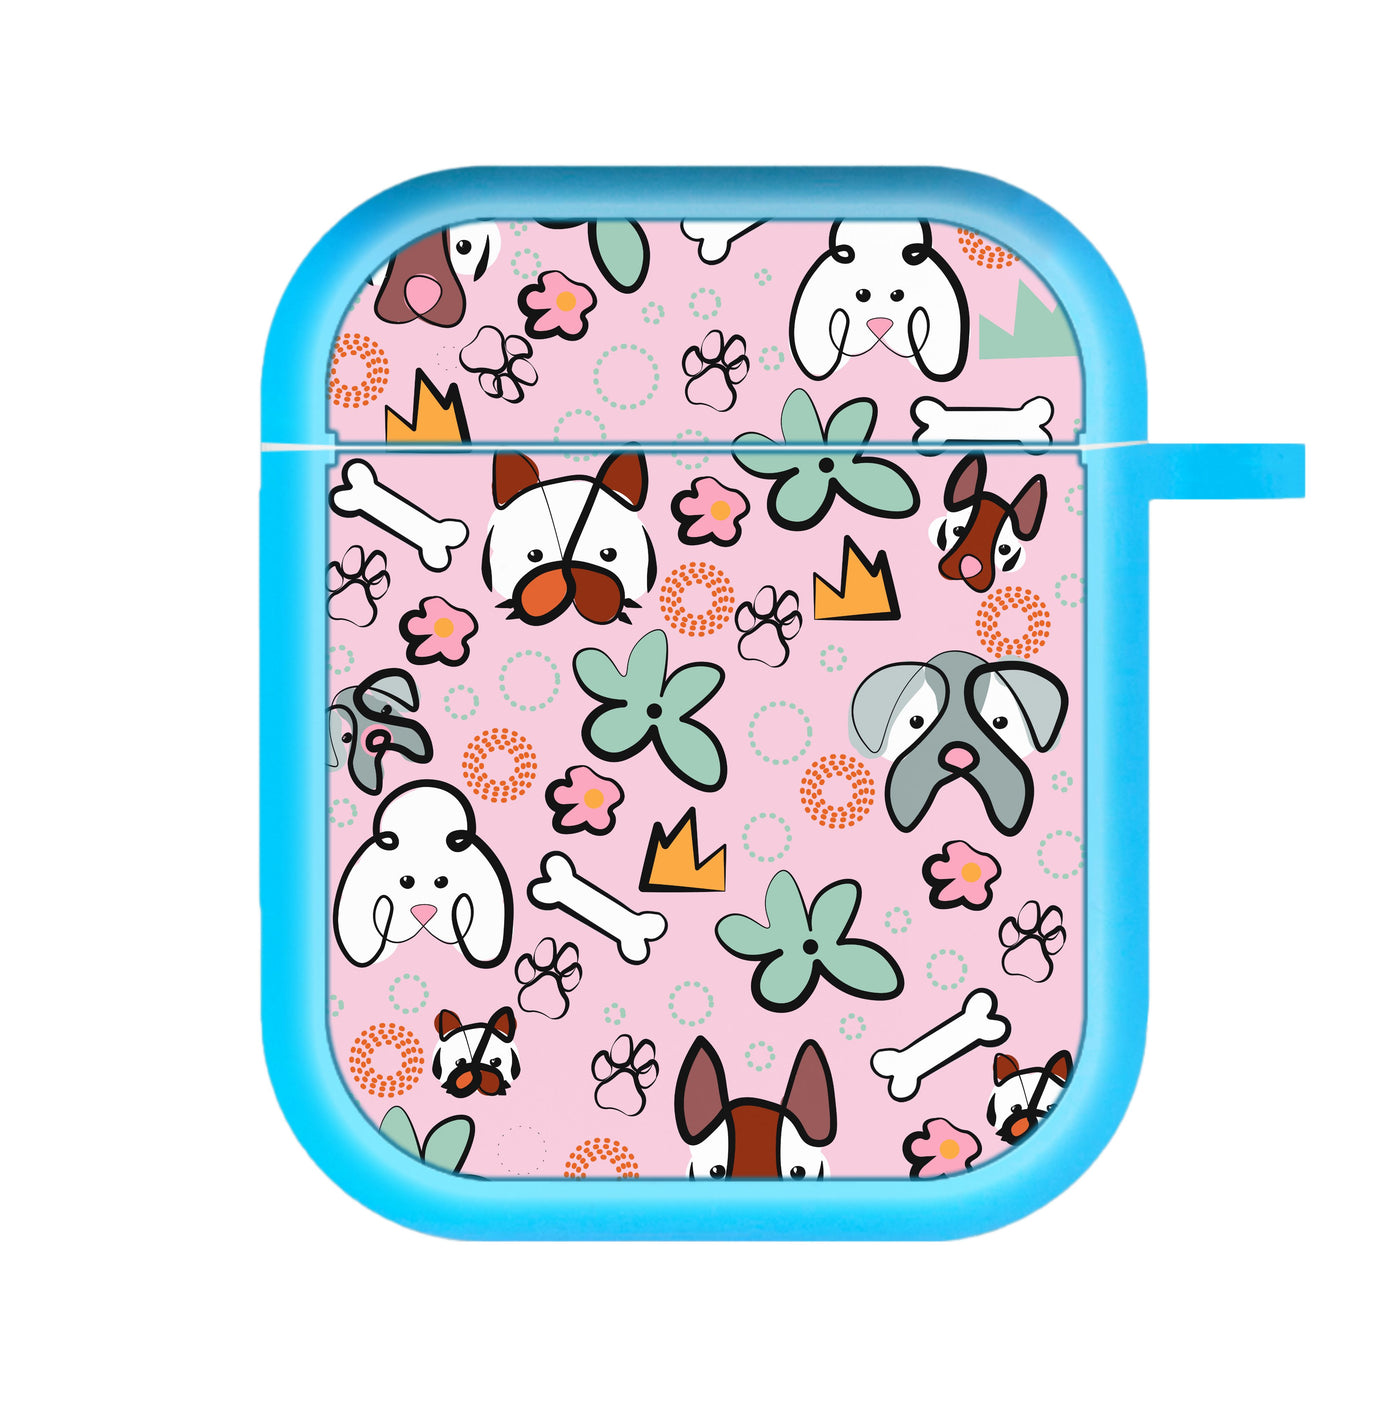 Bones and dogs - Dog Patterns AirPods Case